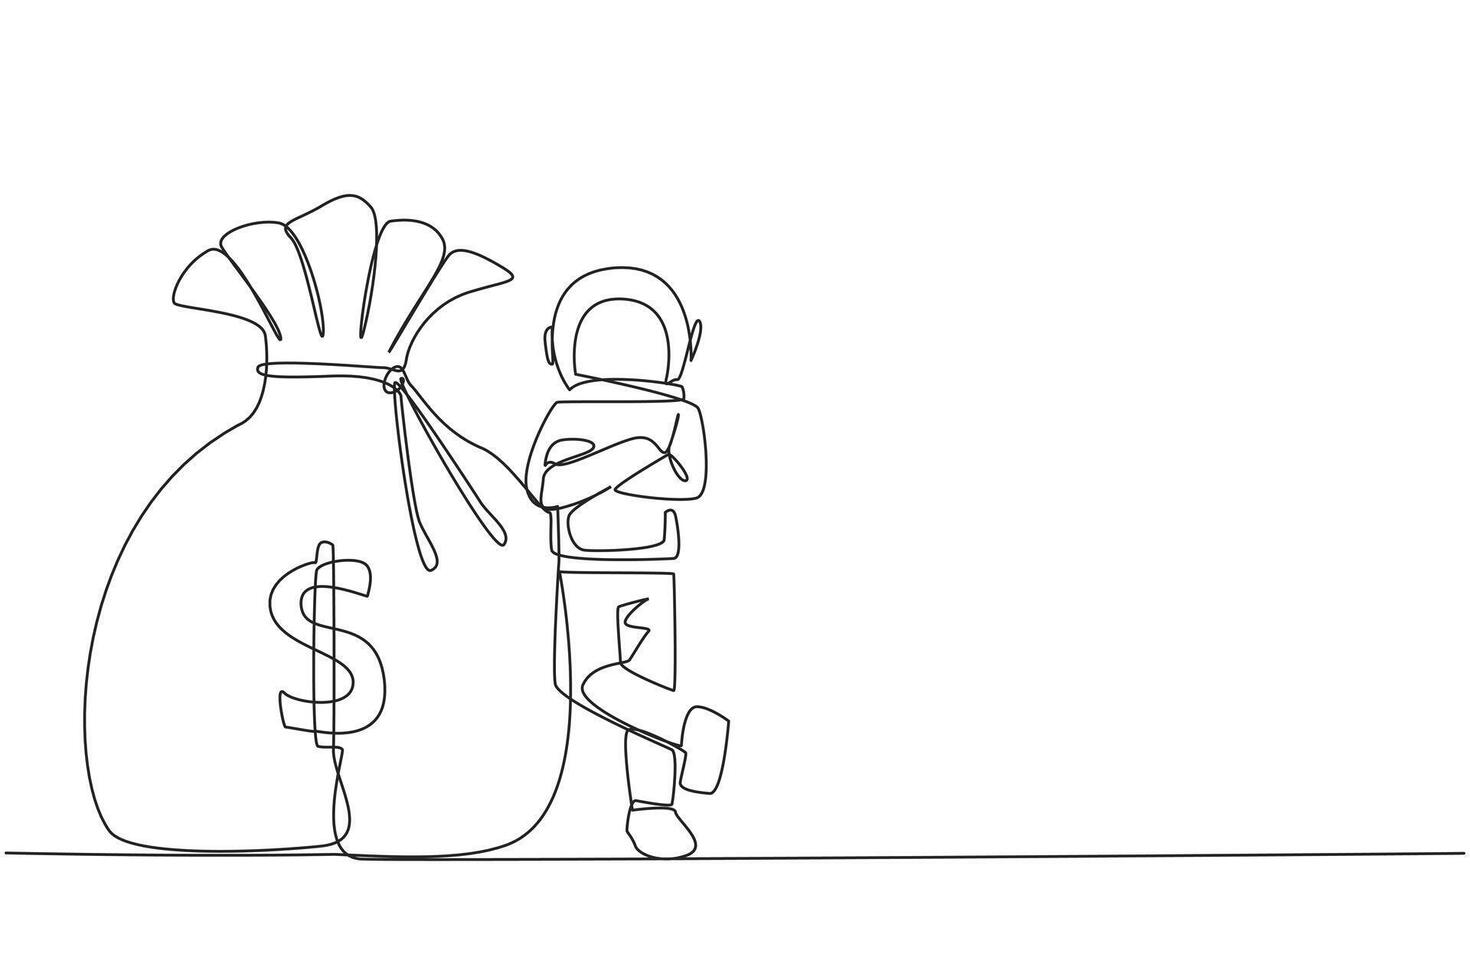 Single one line drawing young energetic astronaut lean on giant money bag. Shows the income received from the space industry. Cosmic galaxy deep space. Continuous line design graphic illustration vector